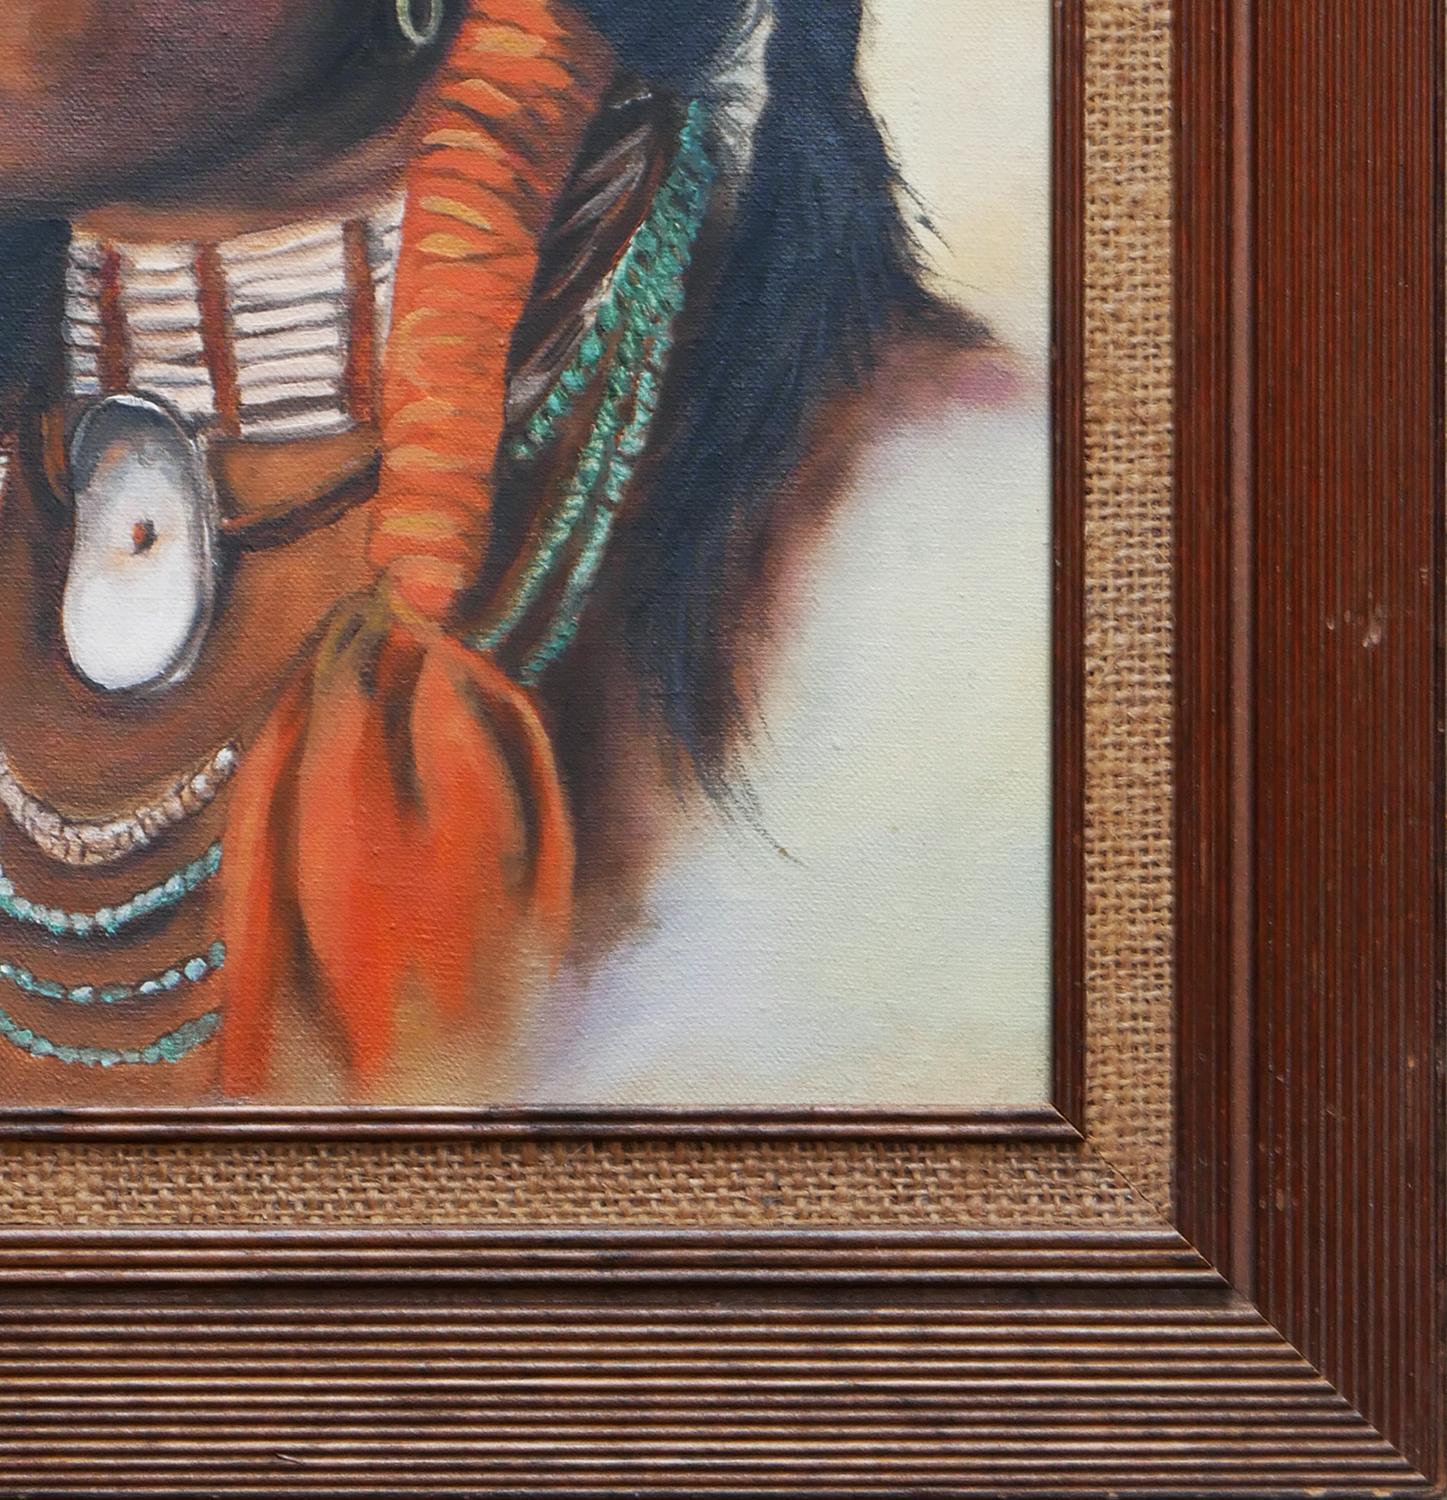 Naturalistic portrait of a Native American male figure by an unknown artist. The work features the man looking to the left and dressed in traditional jewelry and hair accessories set against a light blue background. Currently hung in a brown wooden